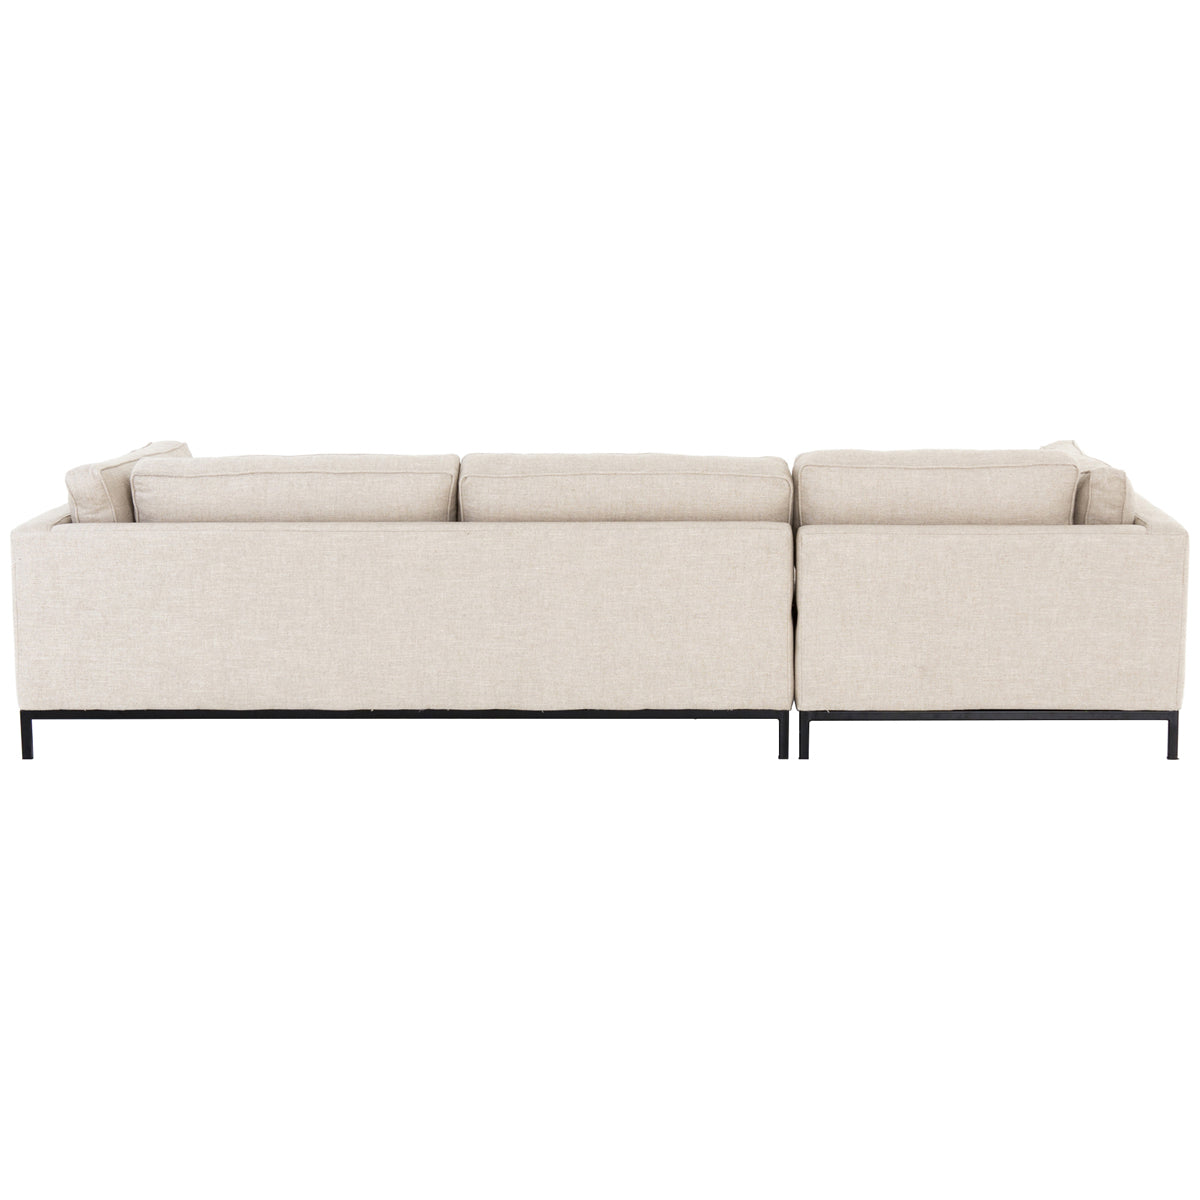 Four Hands Atelier Grammercy 2-Piece Chaise Sectional - Oak Sand